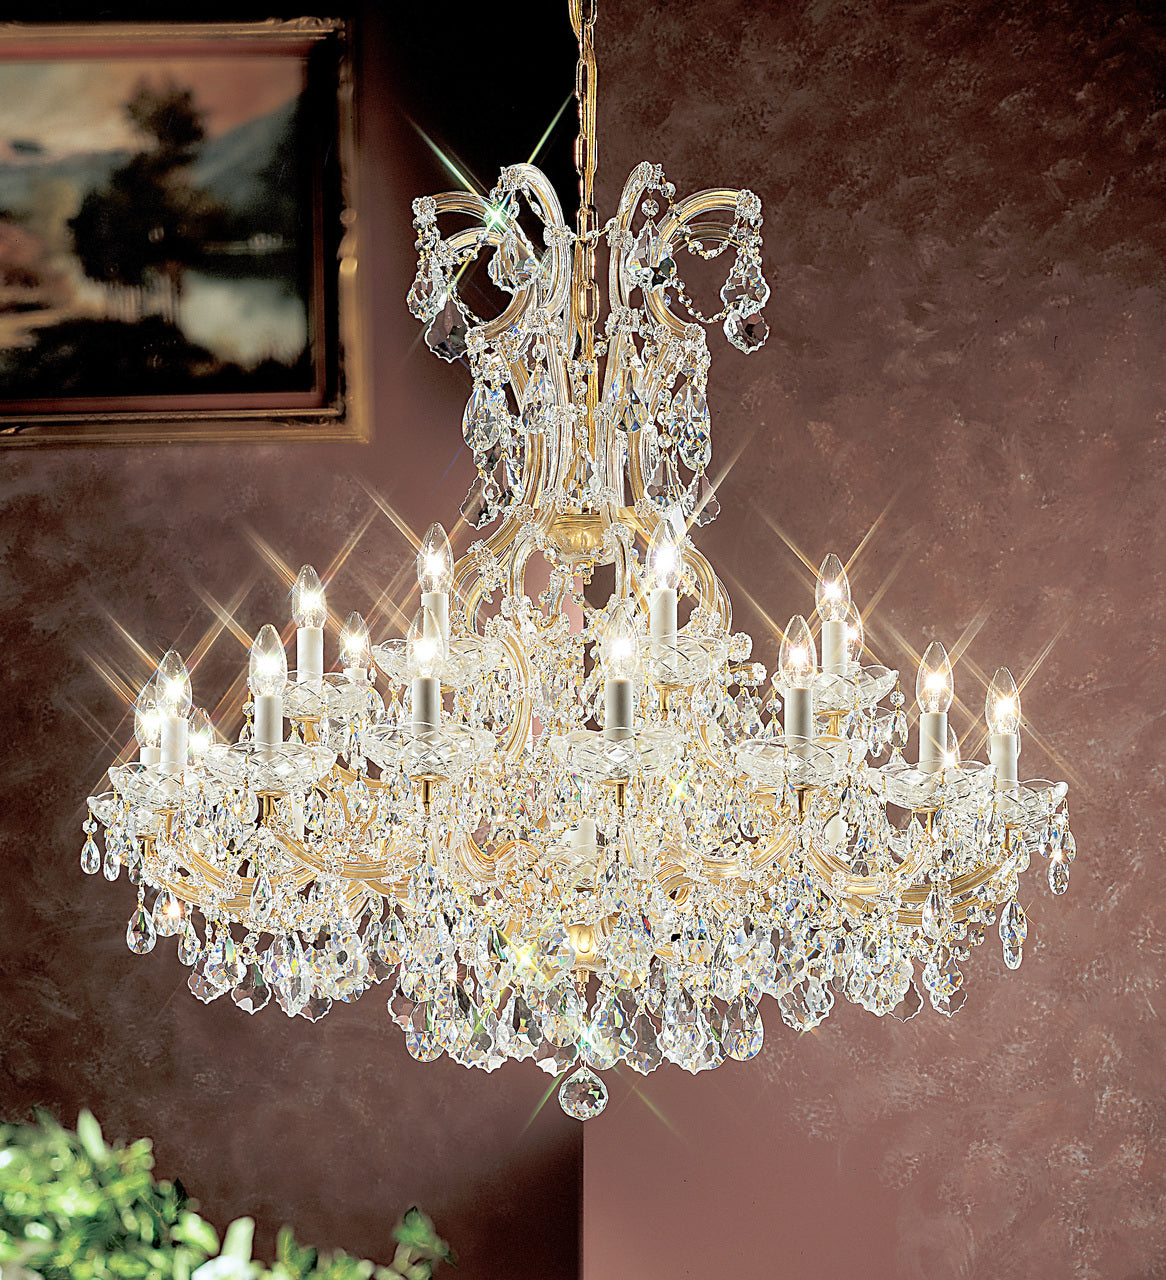 Classic Lighting 8159 OWG C Maria Theresa Traditional Crystal Chandelier in Olde World Gold (Imported from Italy)